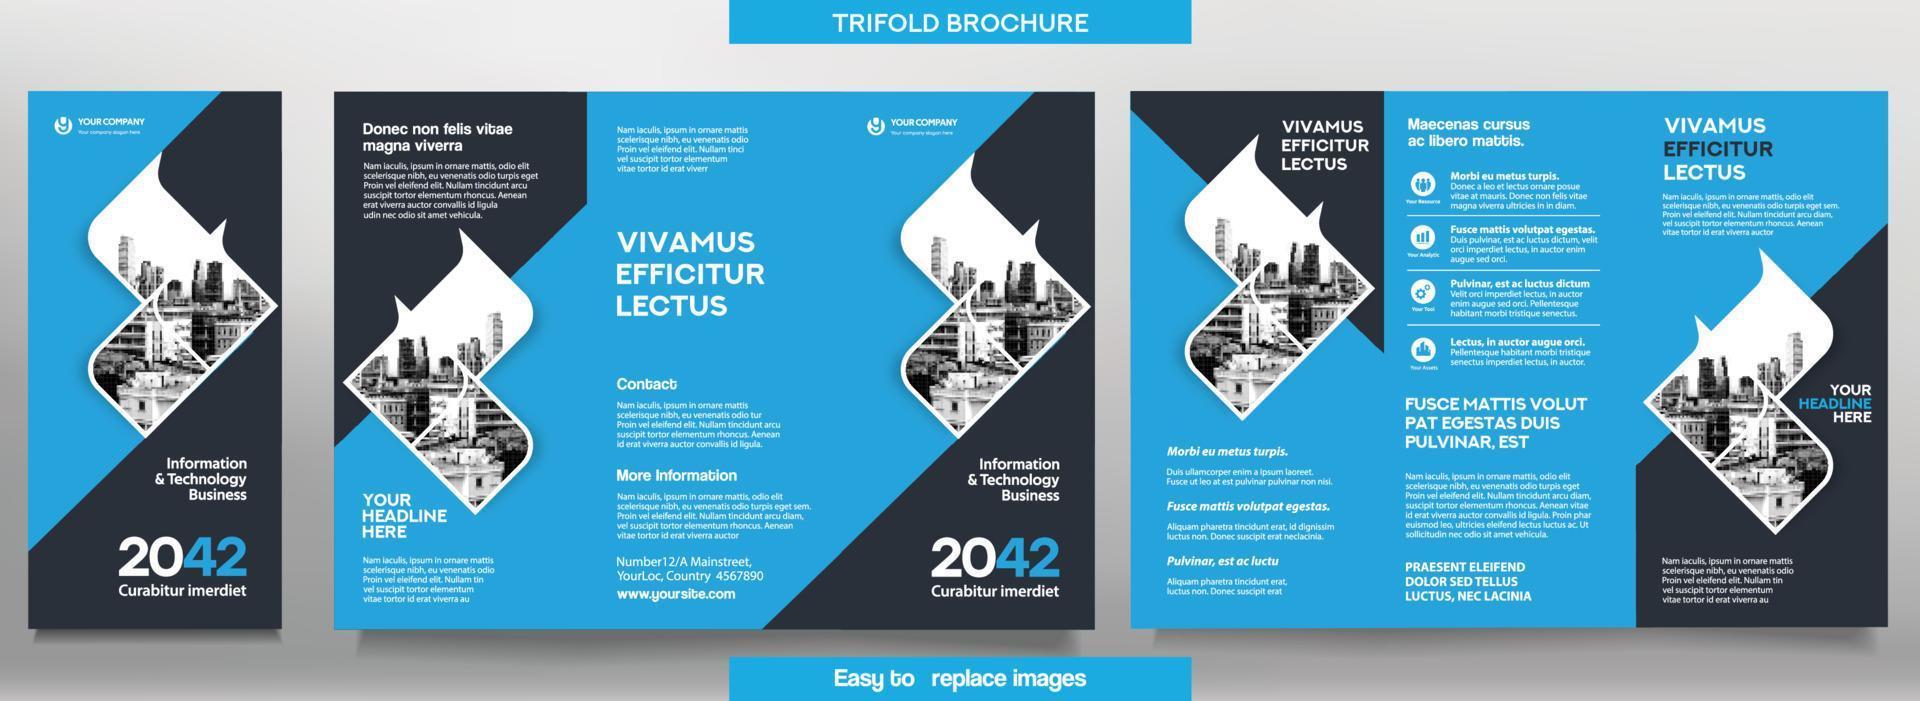 Business Brochure Template in Tri Fold Layout. Corporate Design Leaflet with replacable image. vector